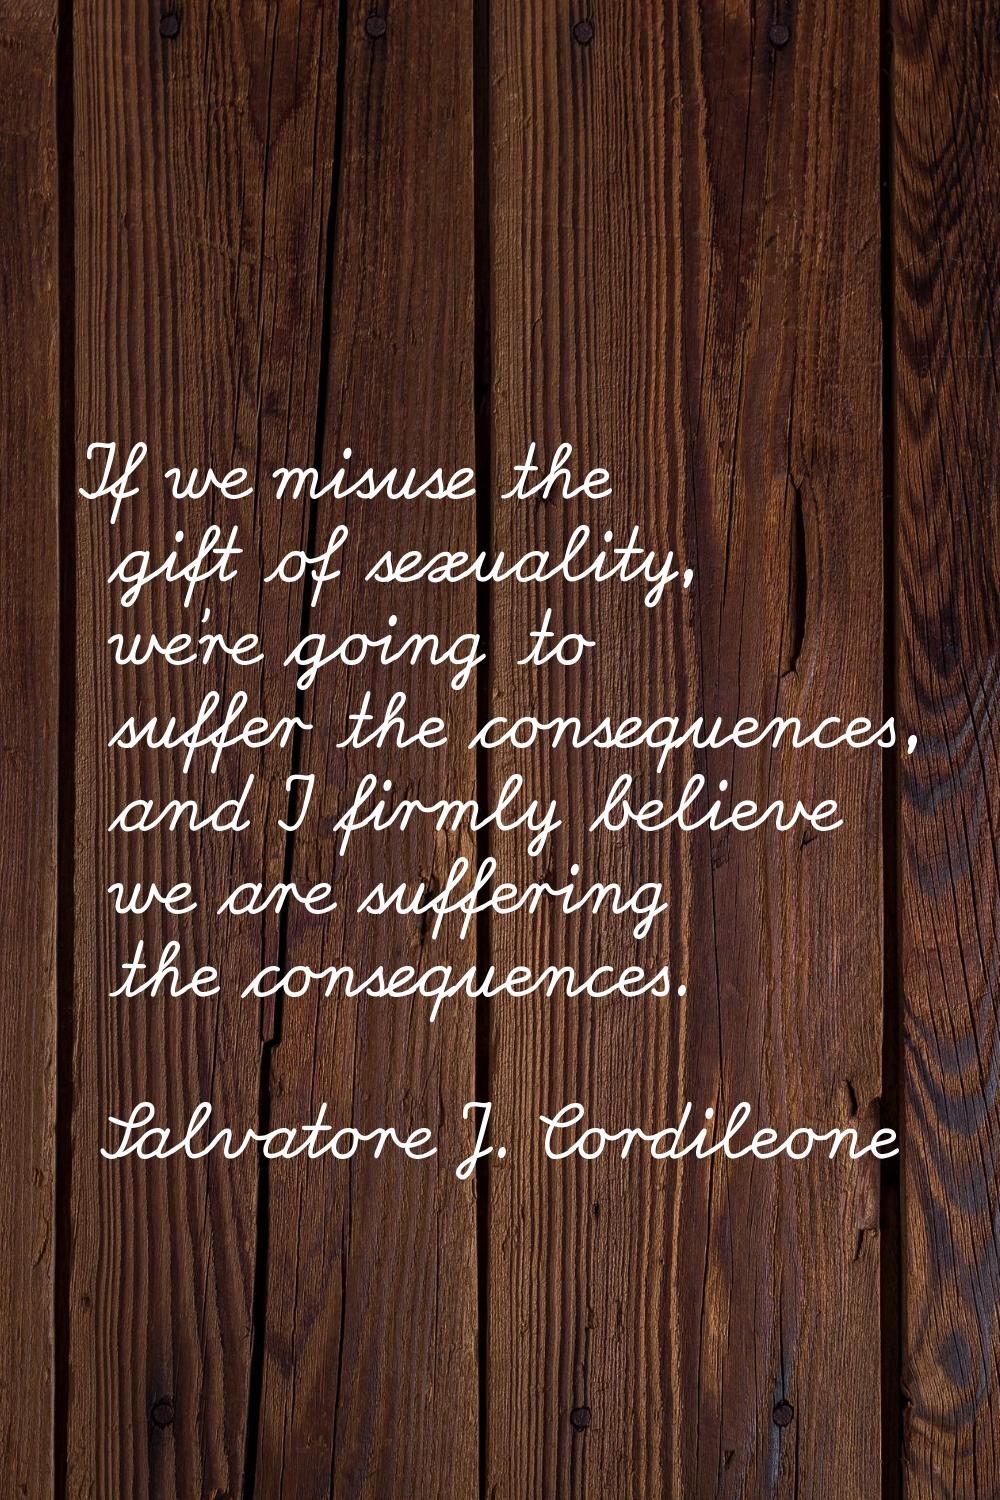 If we misuse the gift of sexuality, we're going to suffer the consequences, and I firmly believe we